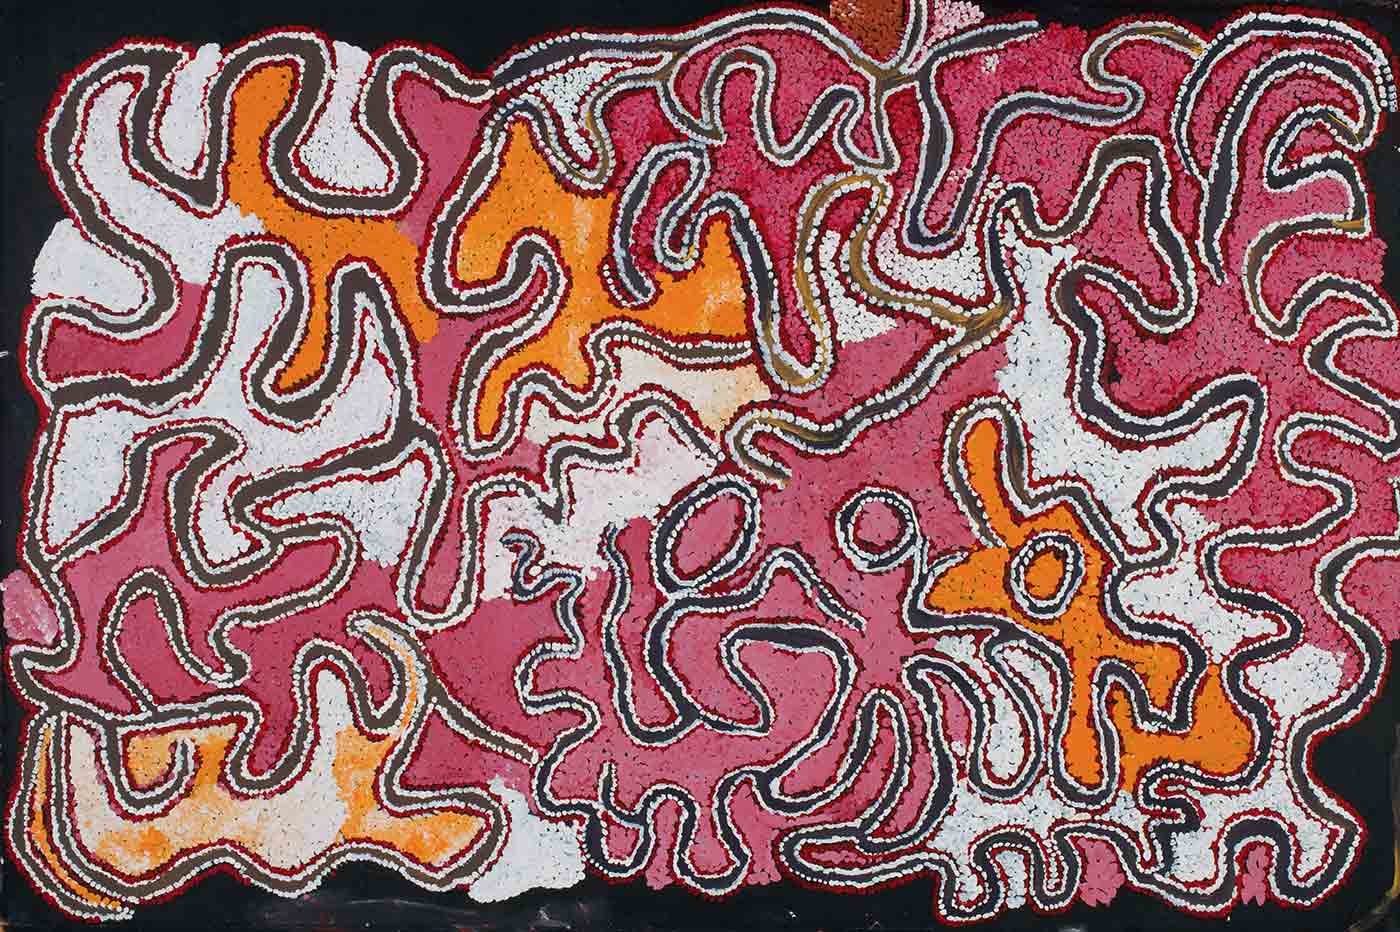 A painting on brown linen of interlocking deeply curved shapes in pink and dark pink dots, with some orange and pale pink dot filled shapes. The shapes are edged with lines of white and red dots and have a narrow line of black between them. There are two orange shapes towards the top centre, an apricot shape in the lower left and an orange shape at the lower right corner. Some of the black lines have an overlay of translucent yellow. - click to view larger image